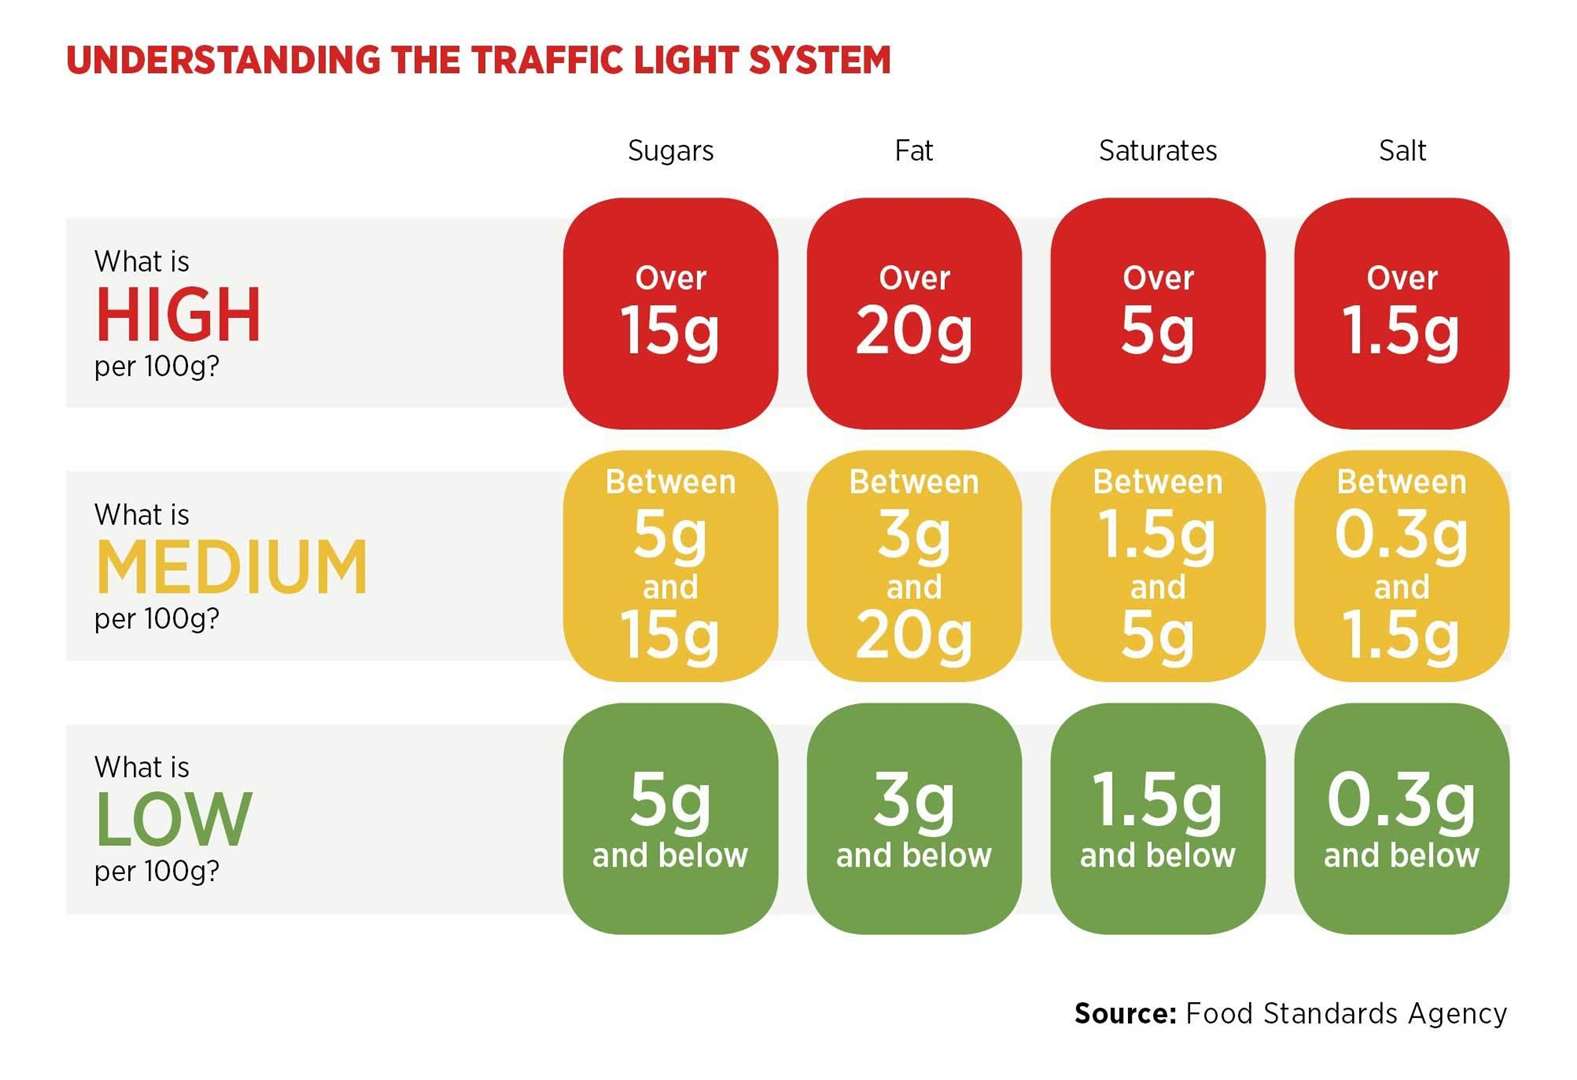 Children's snacks are not included in the traffic lights system for food labelling